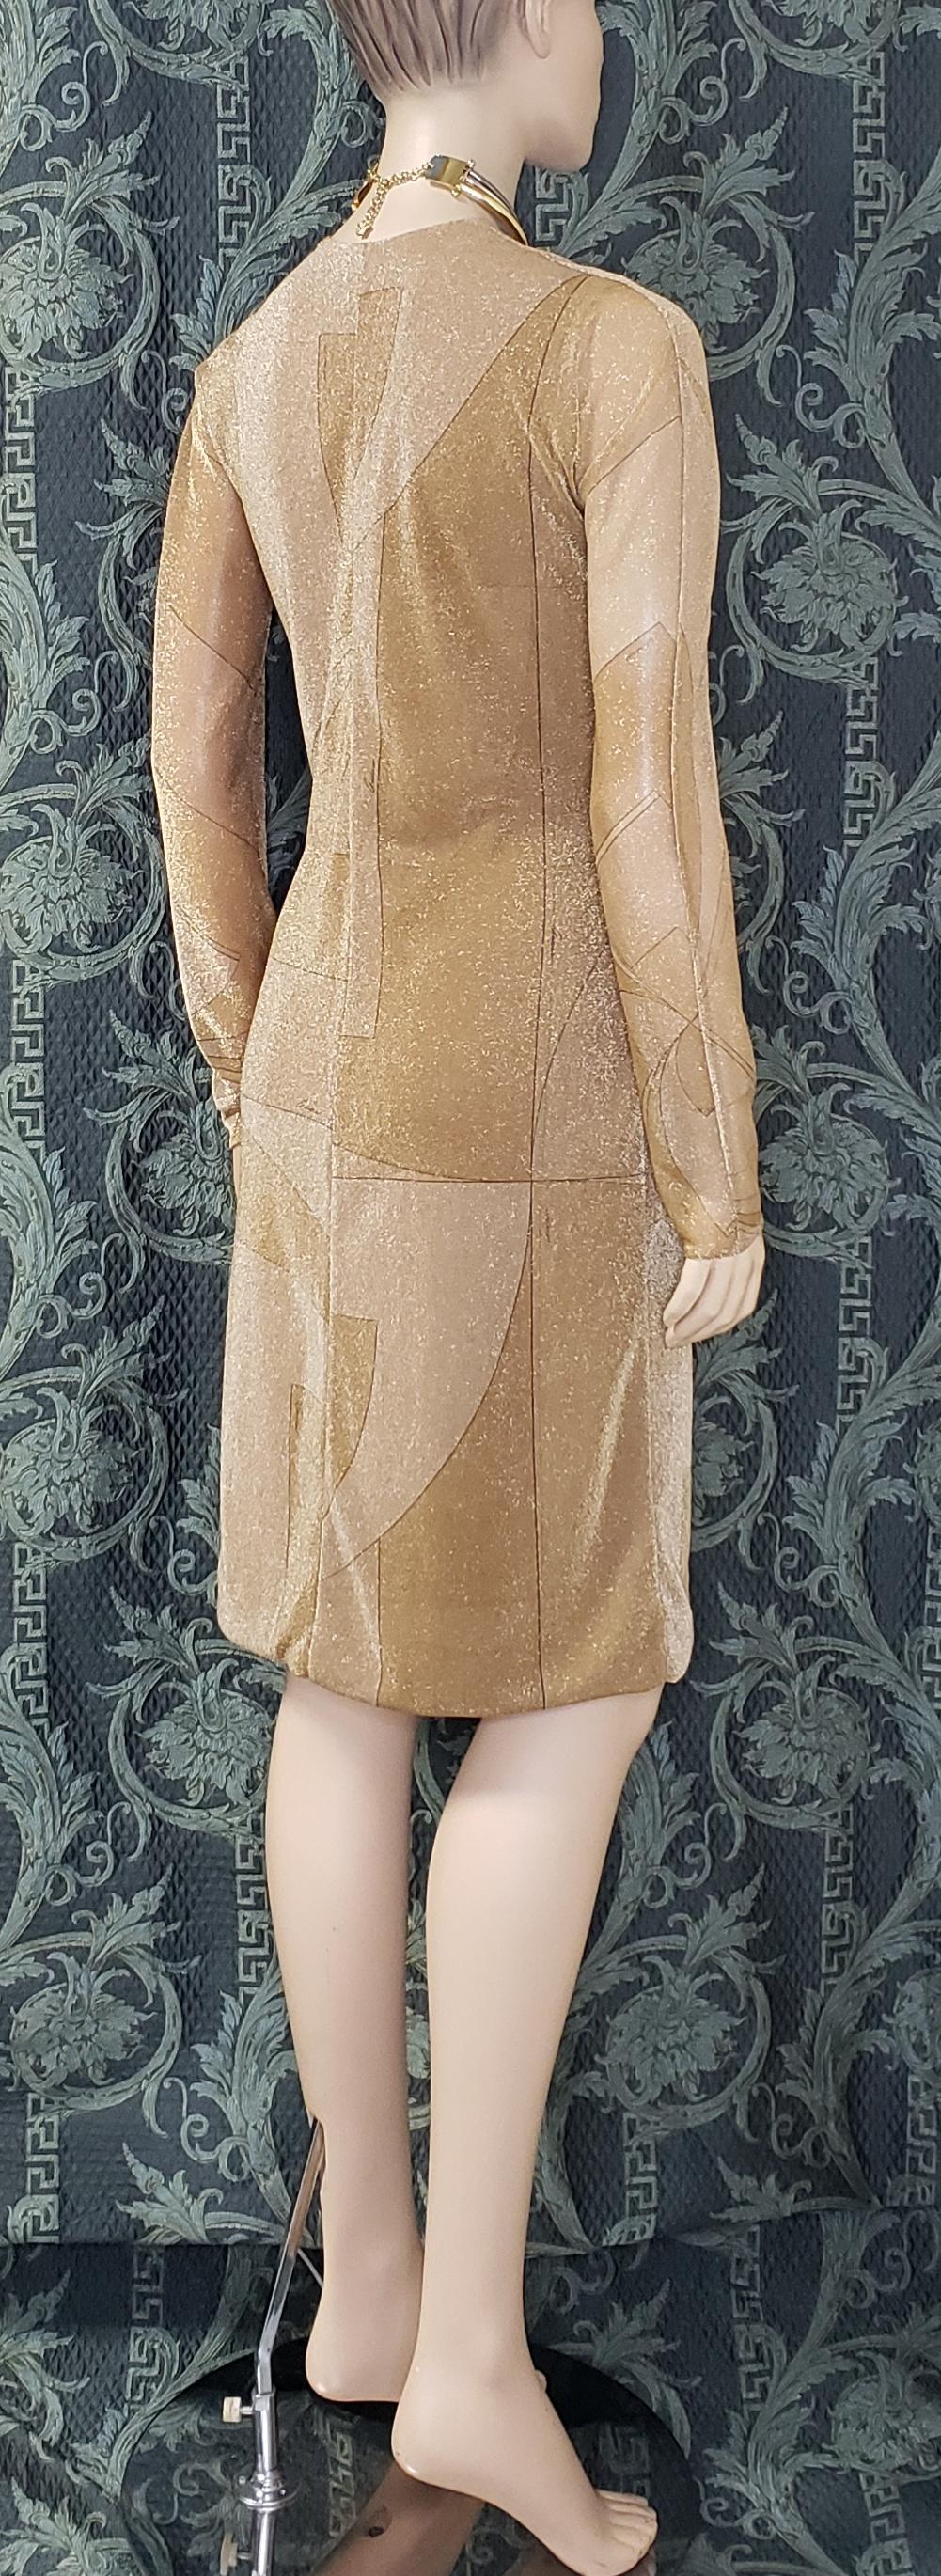 Brown TOM FORD FOR GUCCI VINTAGE GOLD DRESS With LION BROOCH A / W 2000 40 - 4